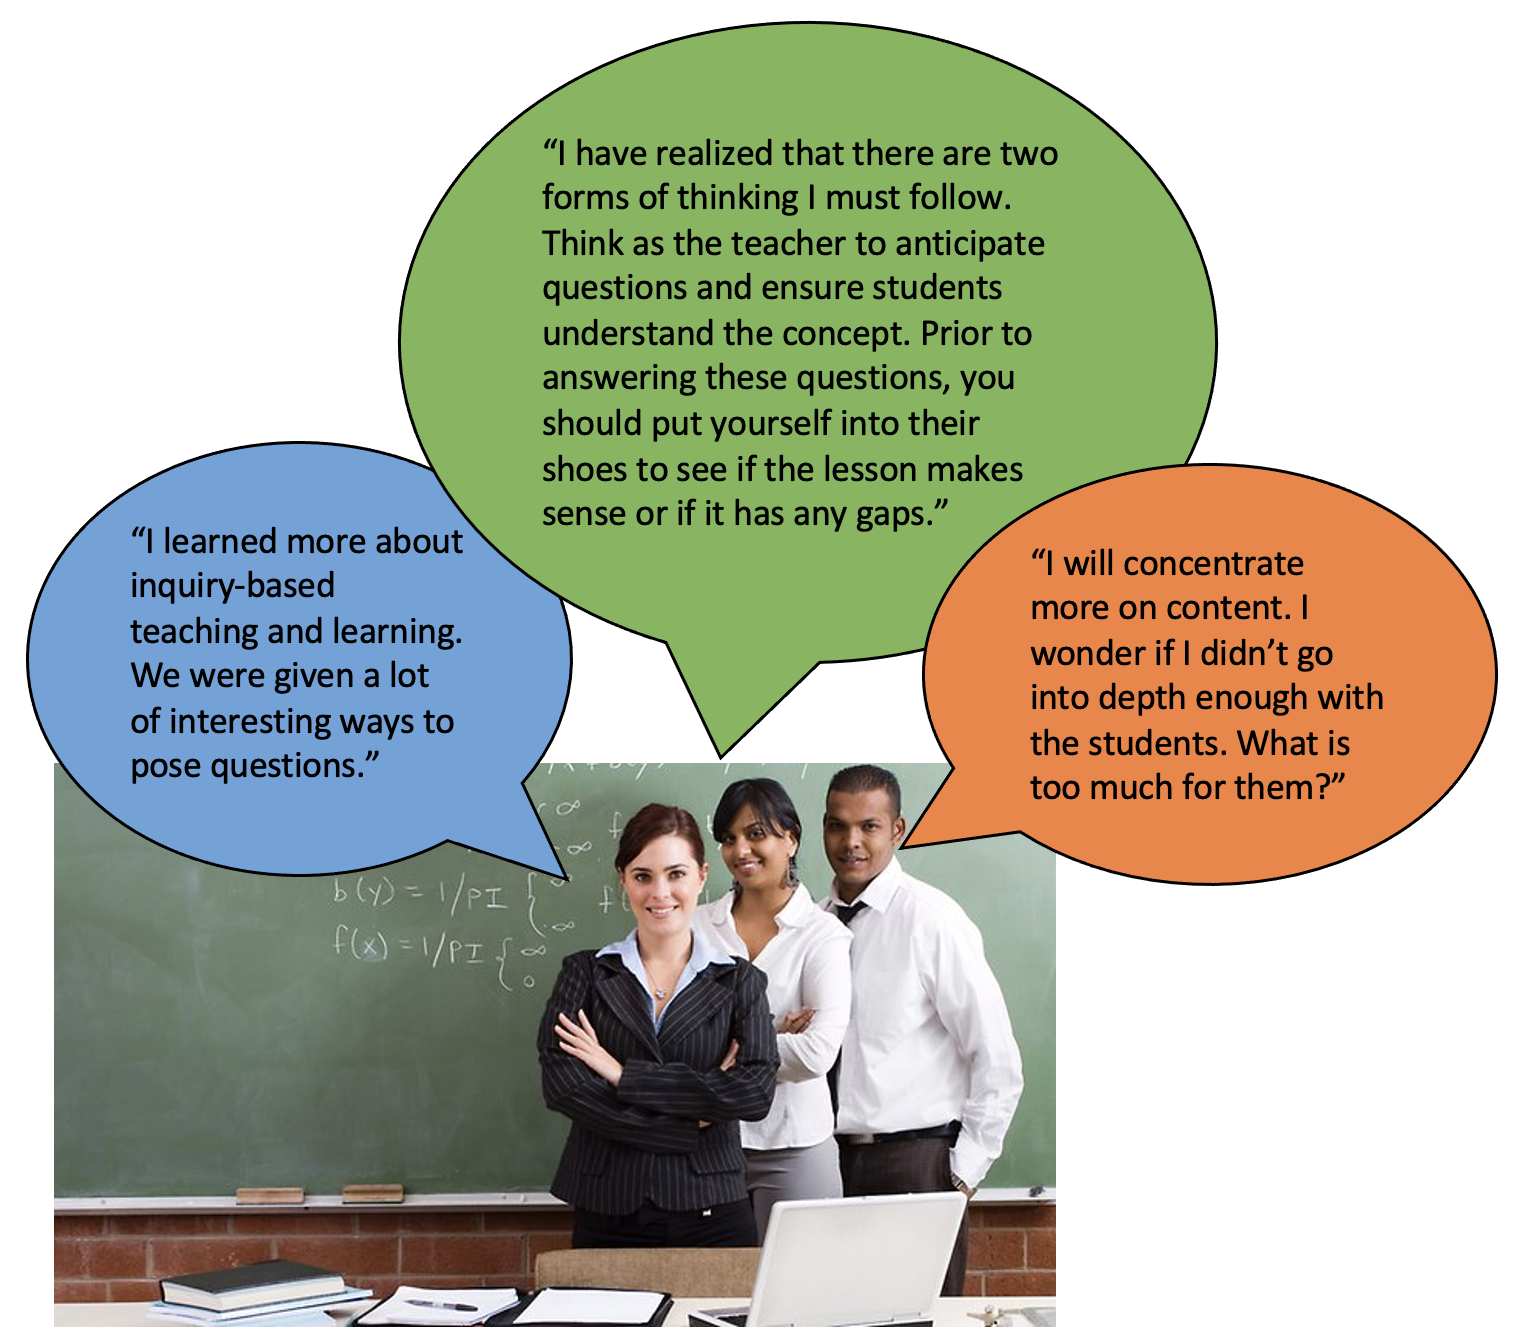 Image of three teachers standing in front of a chalkboard with quotes about their learning experiences.